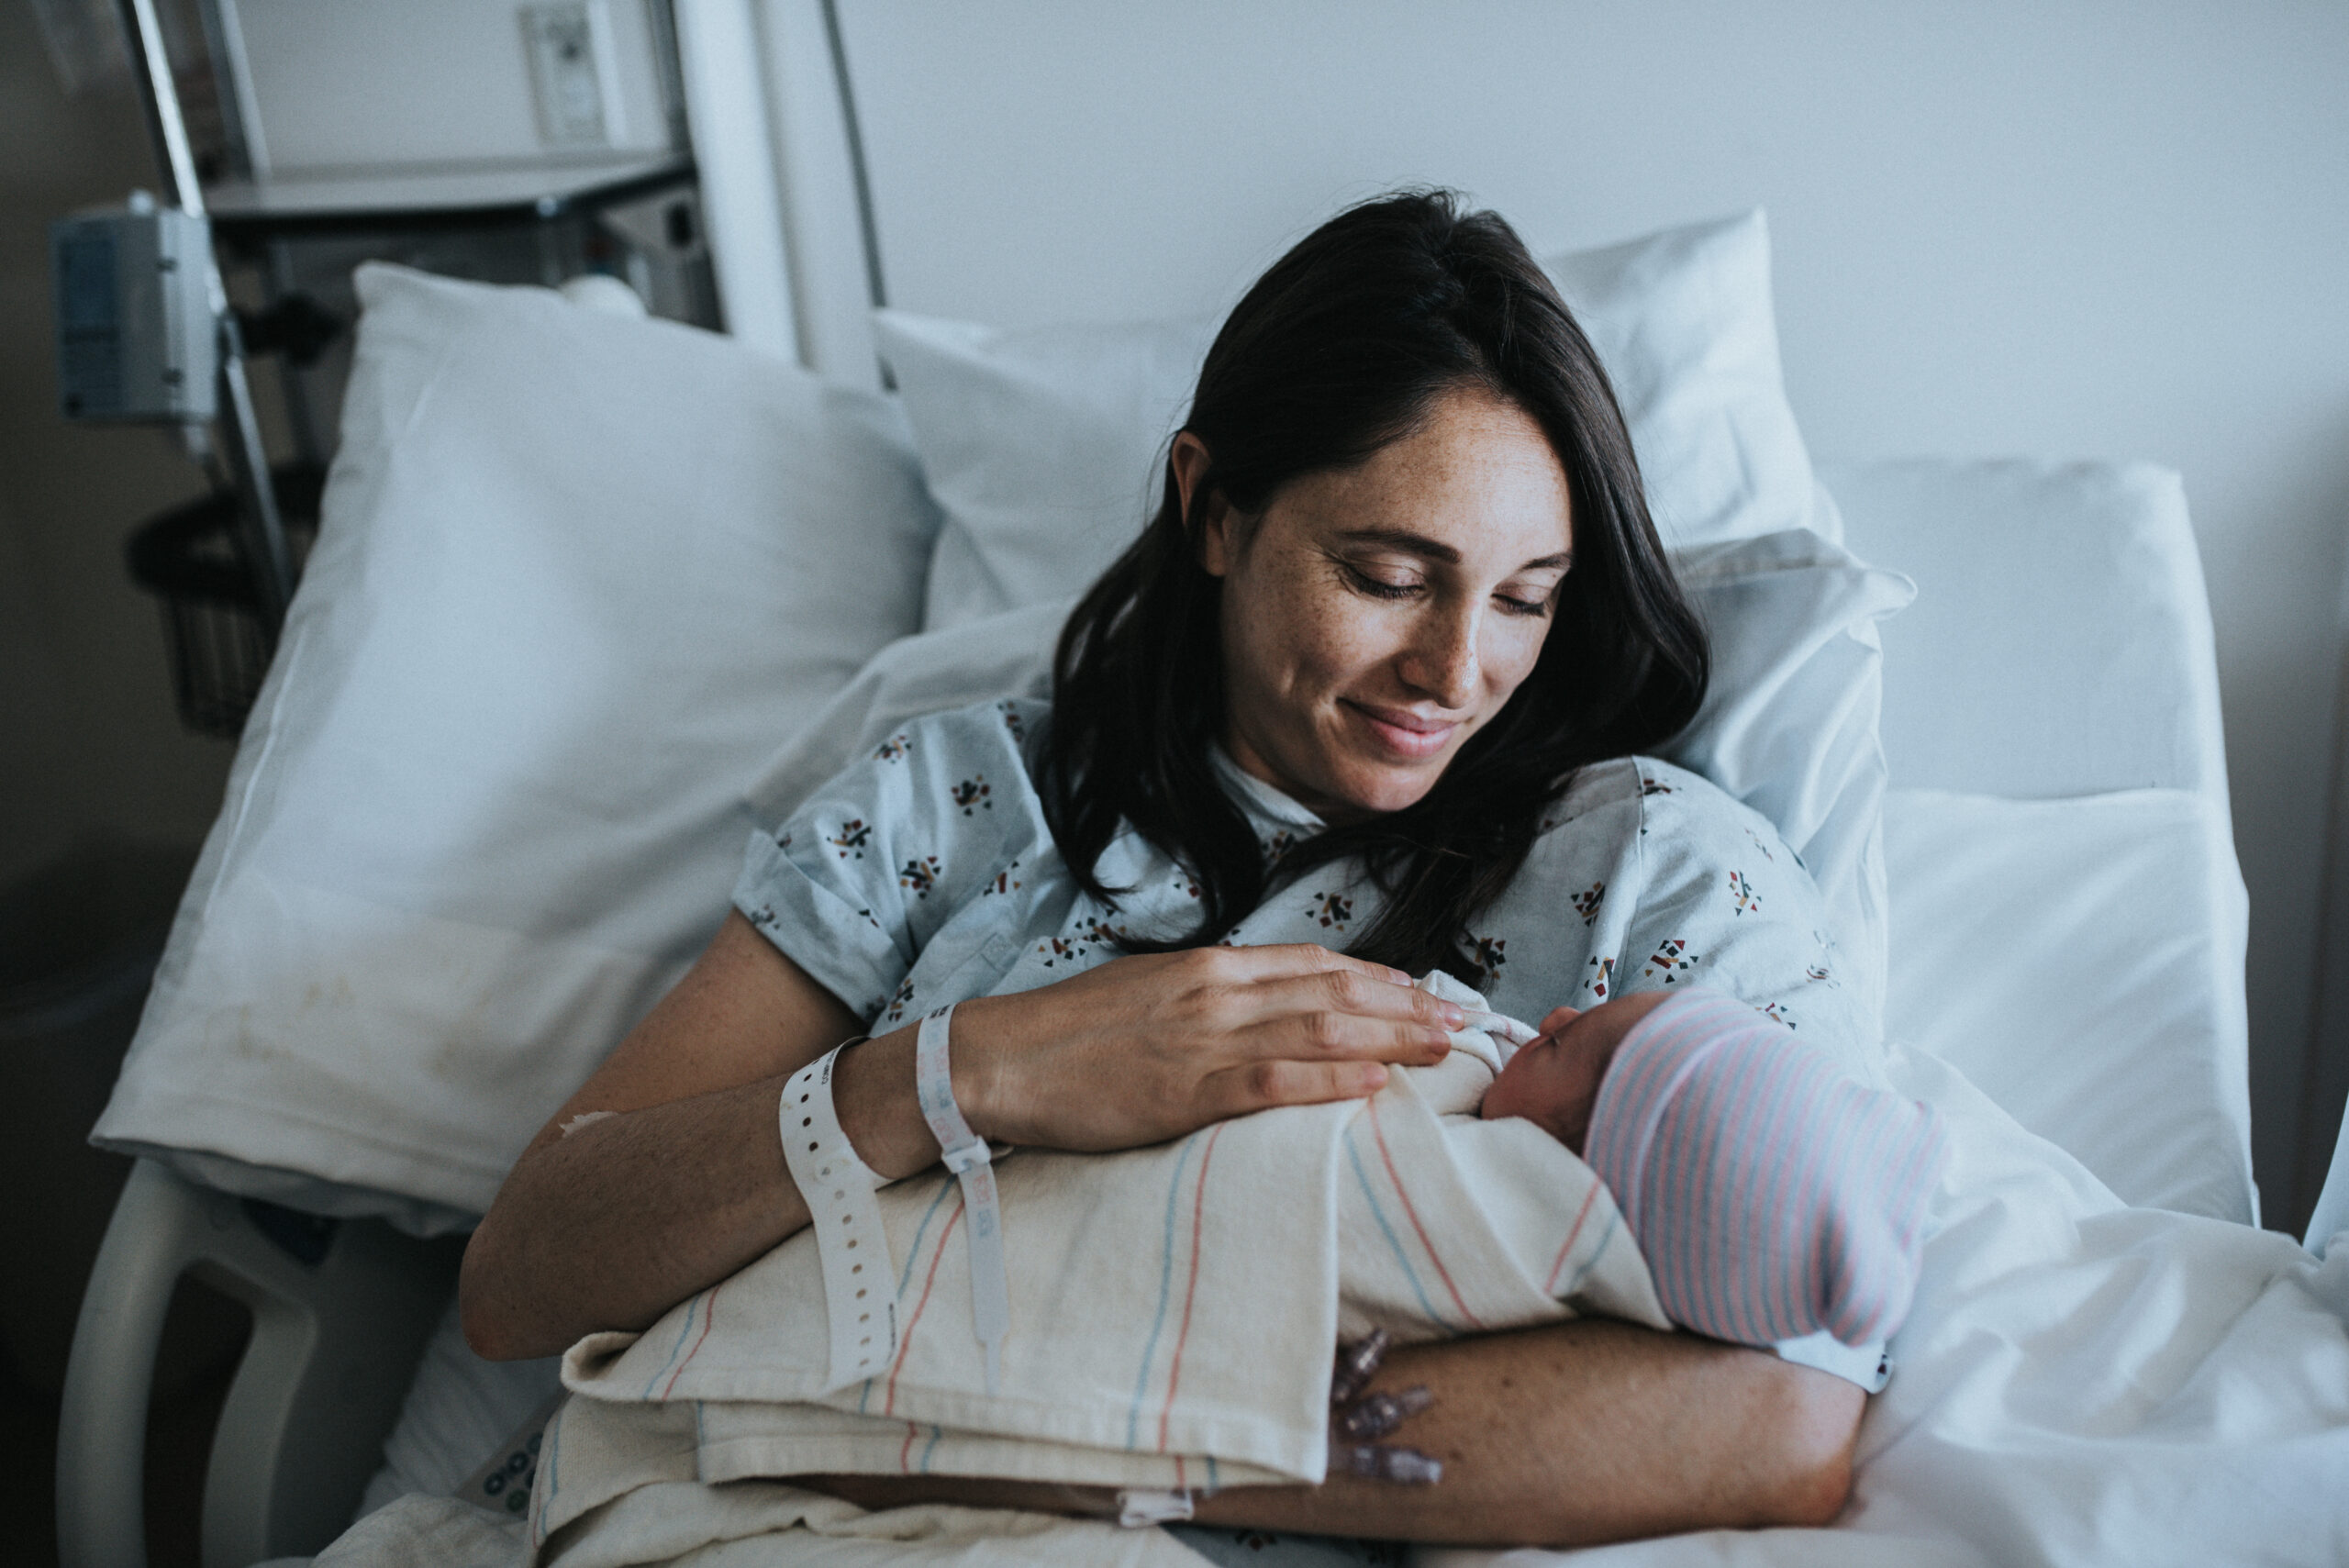 Color image of mother holding a neborn baby wrapped in a hospital blanket and hat. Mother wears a hospital gown and looks down at her baby. Image by Los Angeles Birth Photographer Diana Hinek for #dearbirth